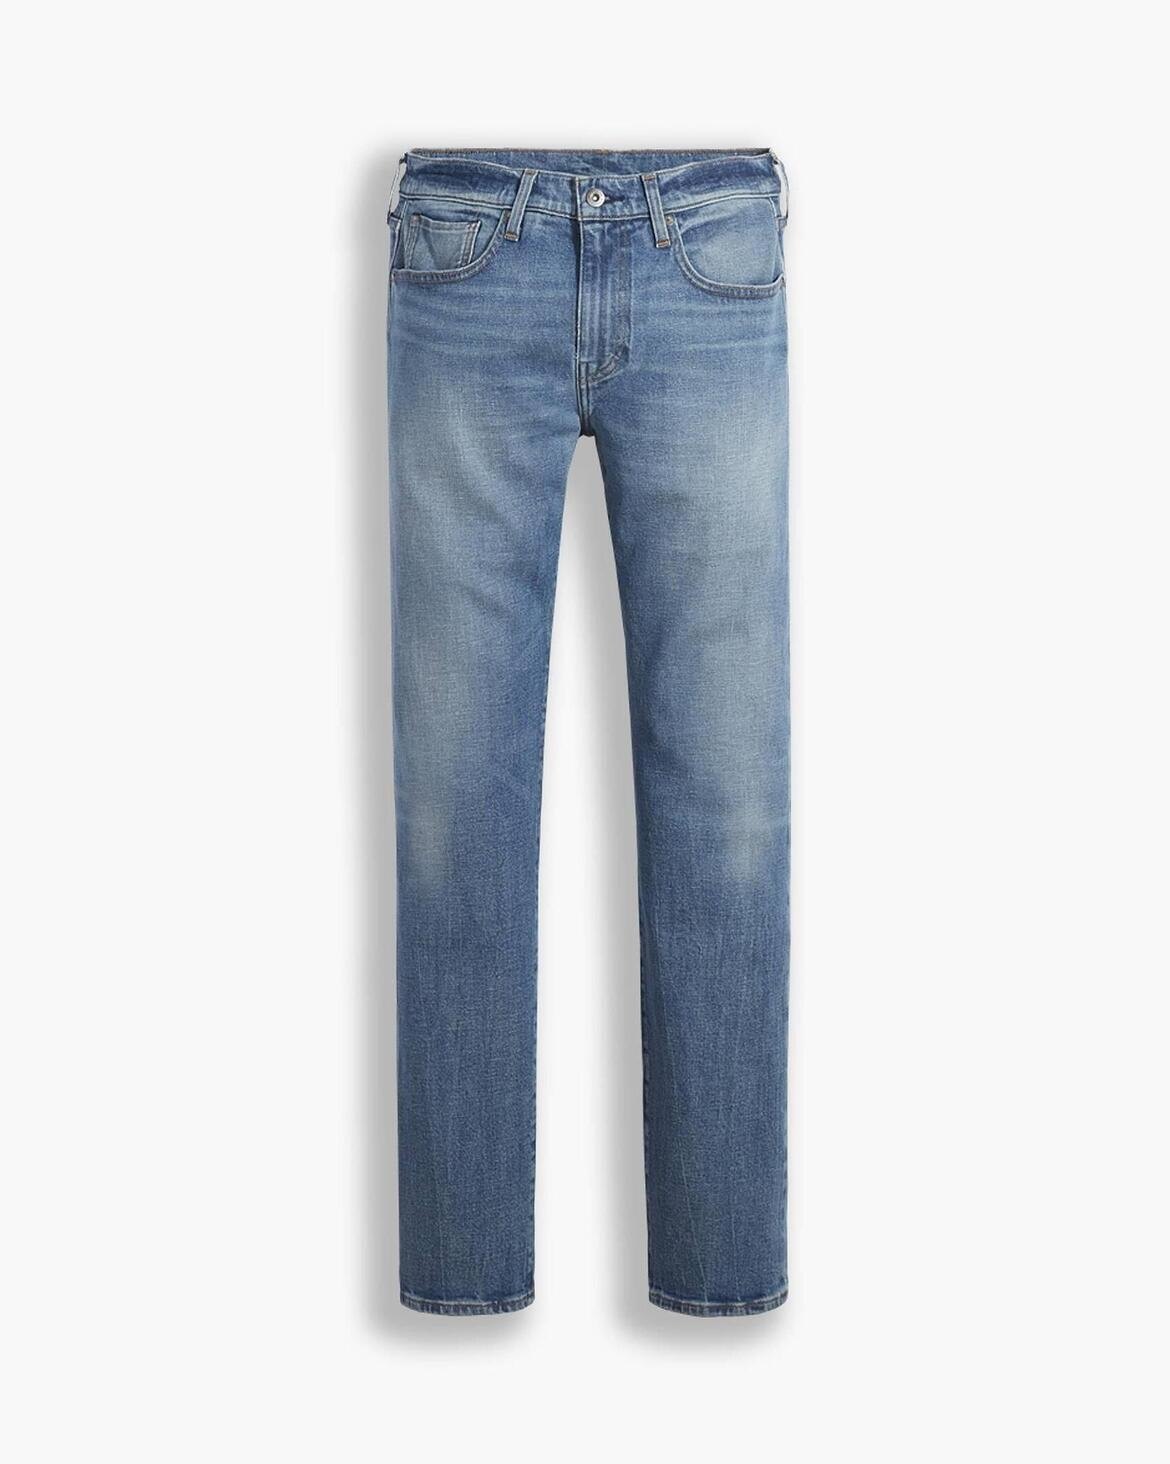 Levi's® Made & Crafted® 502™ Taper Fit Jeans | Levi